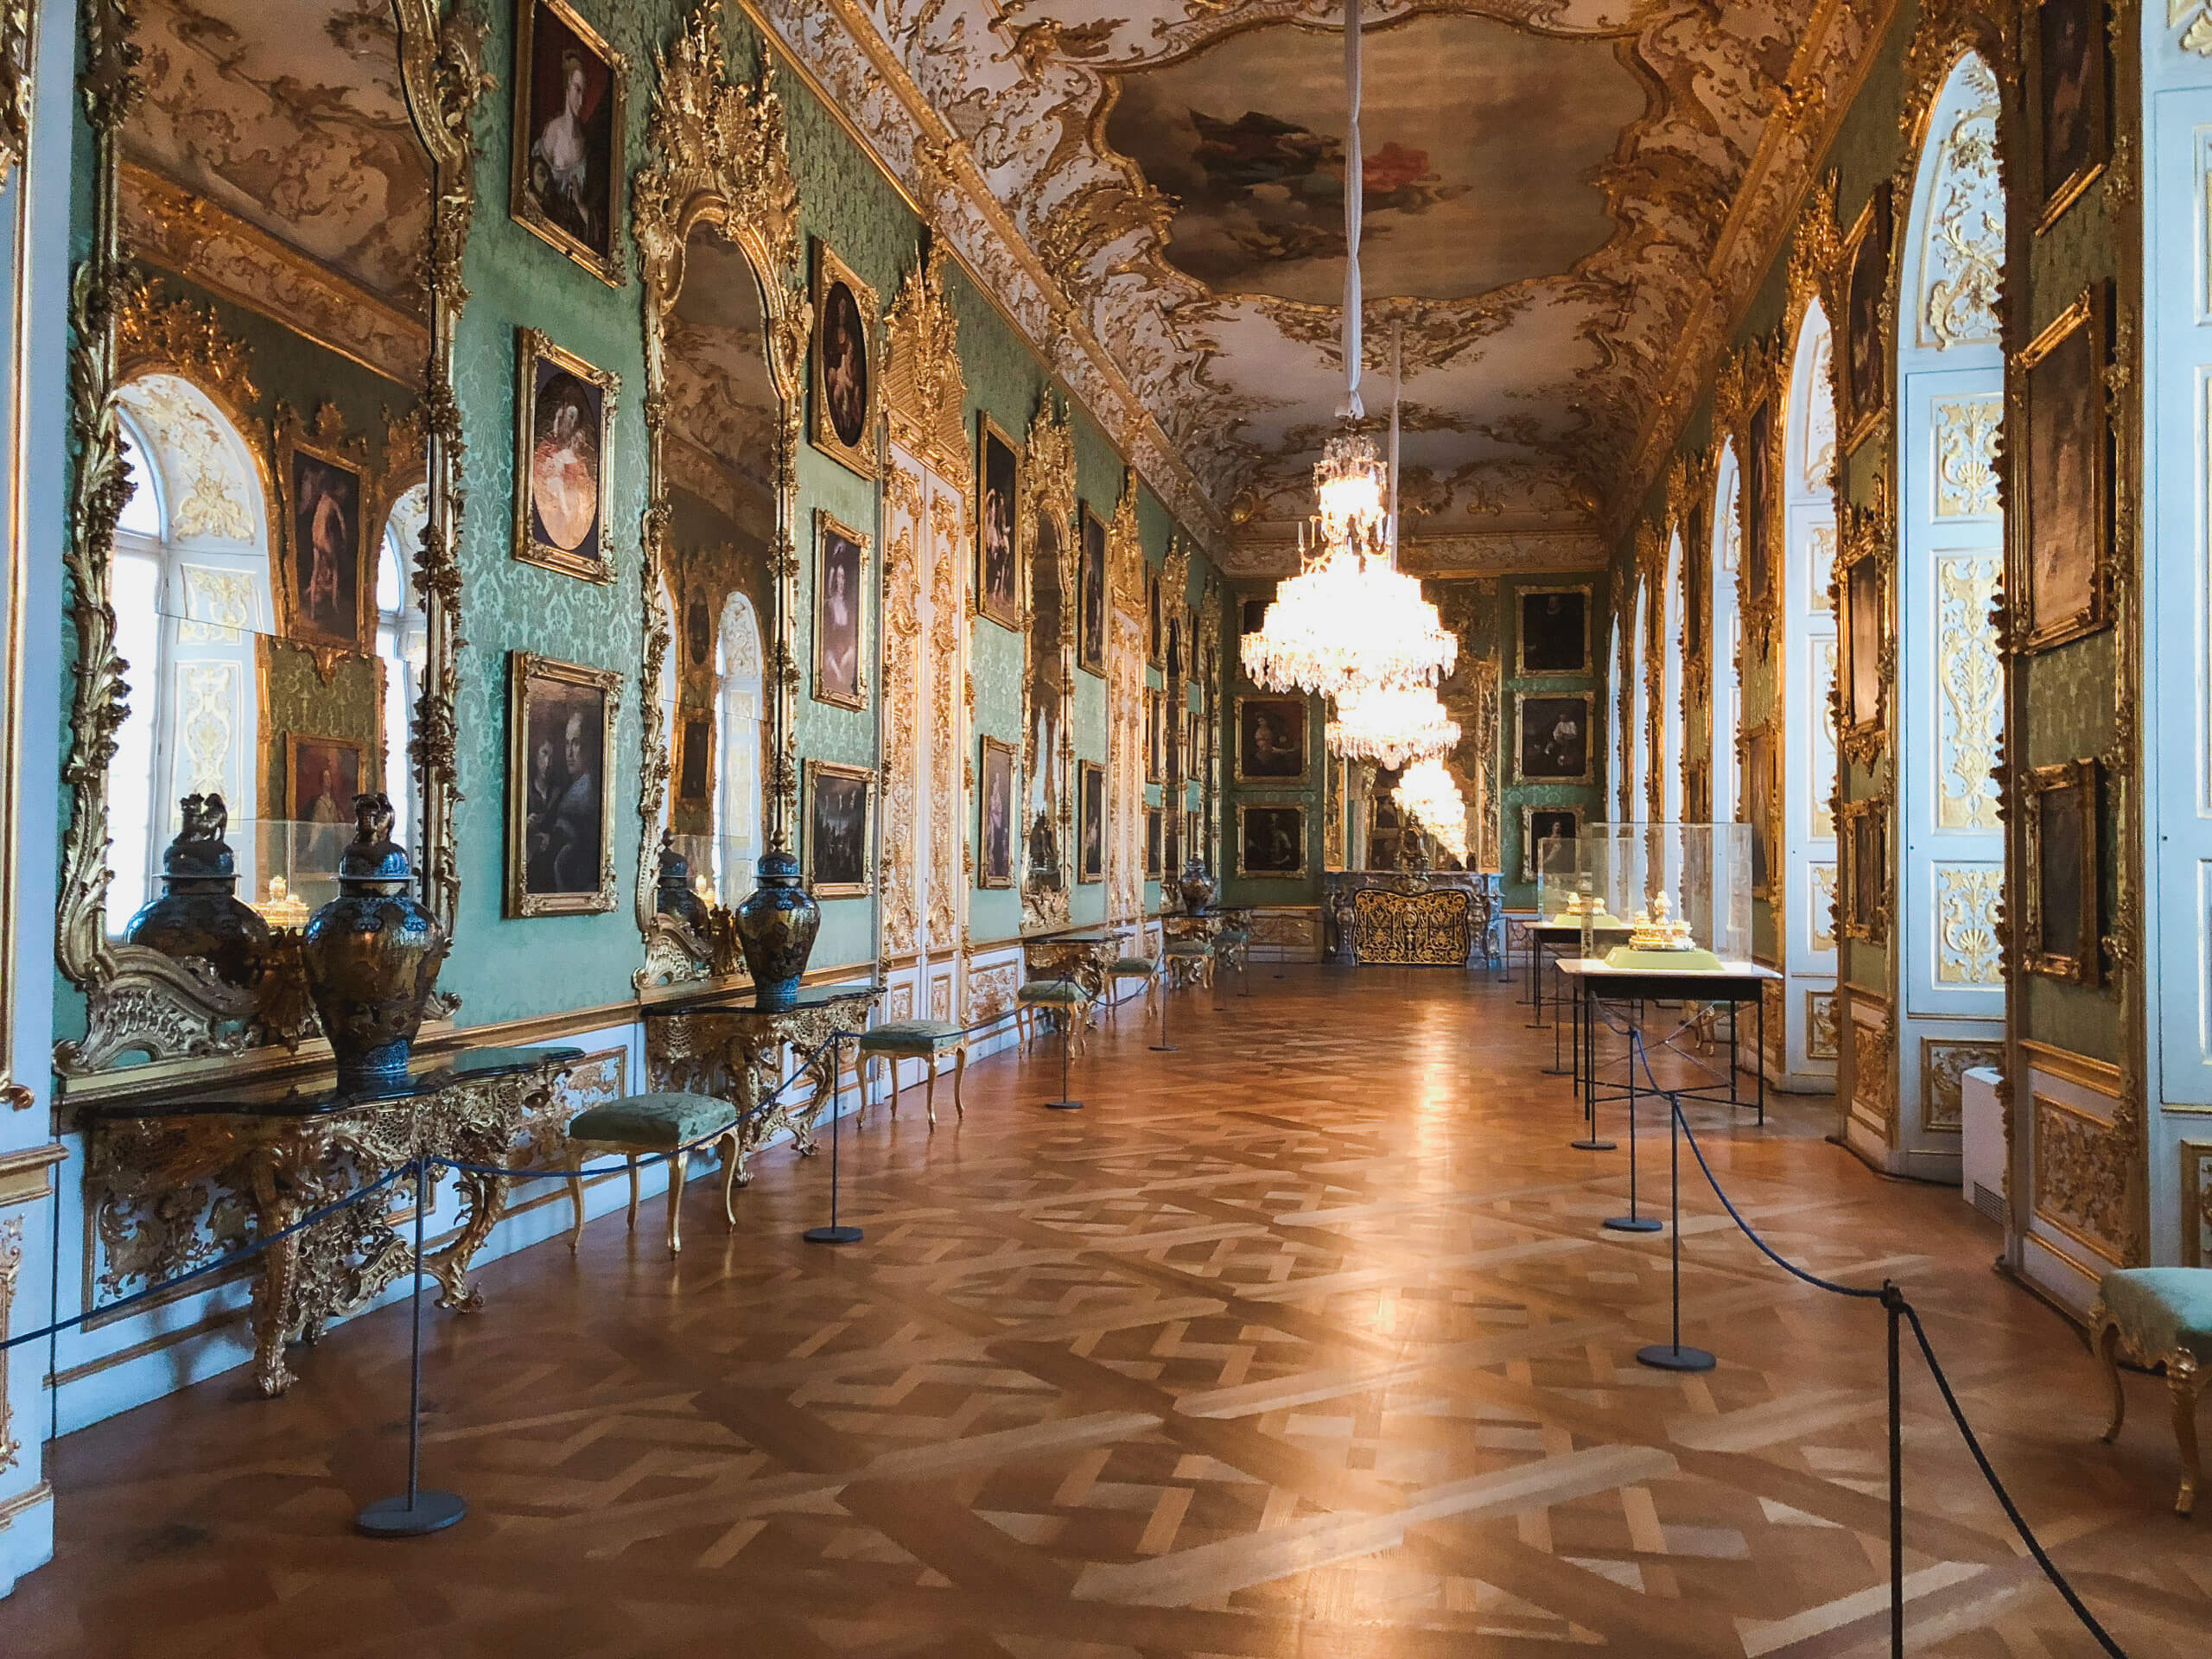 Residenz - 15 Unmissable things to do in Munich